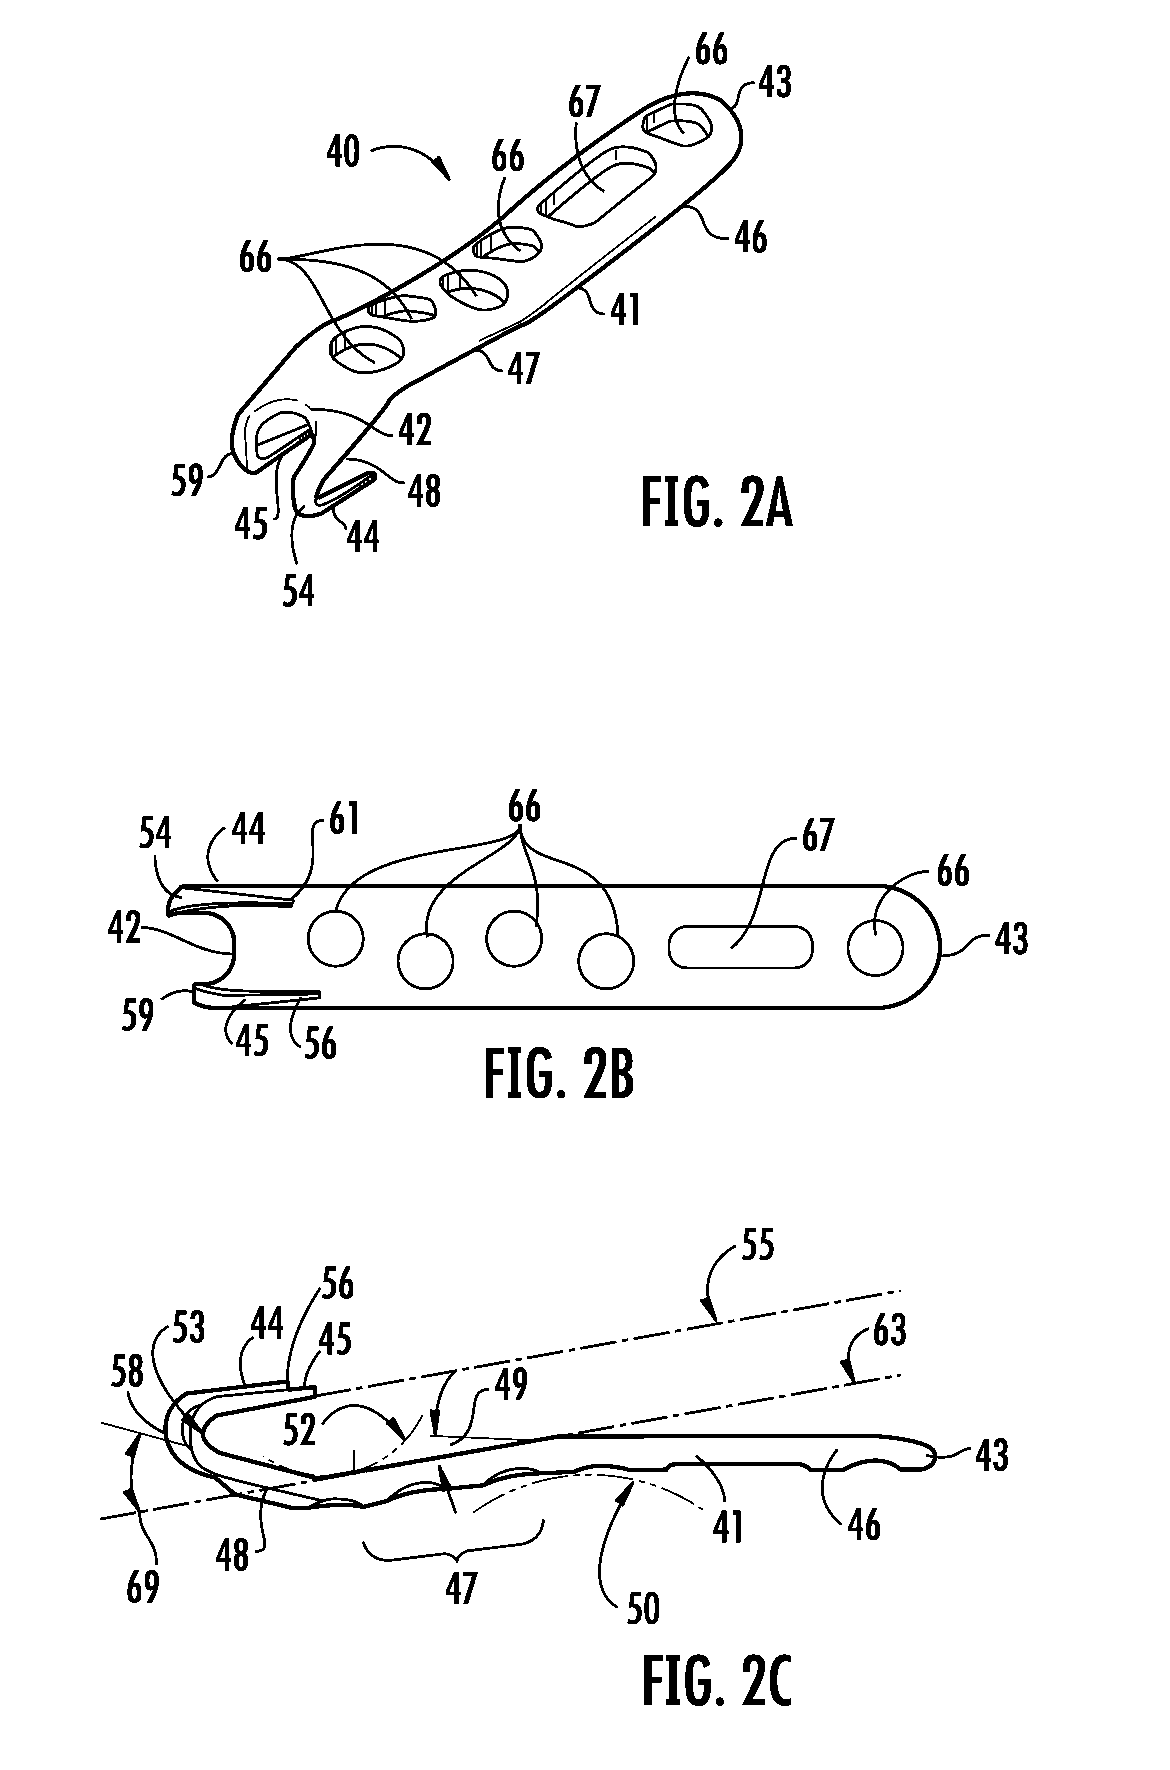 Contoured bone plate for fracture fixation having hook members and drill guide for same